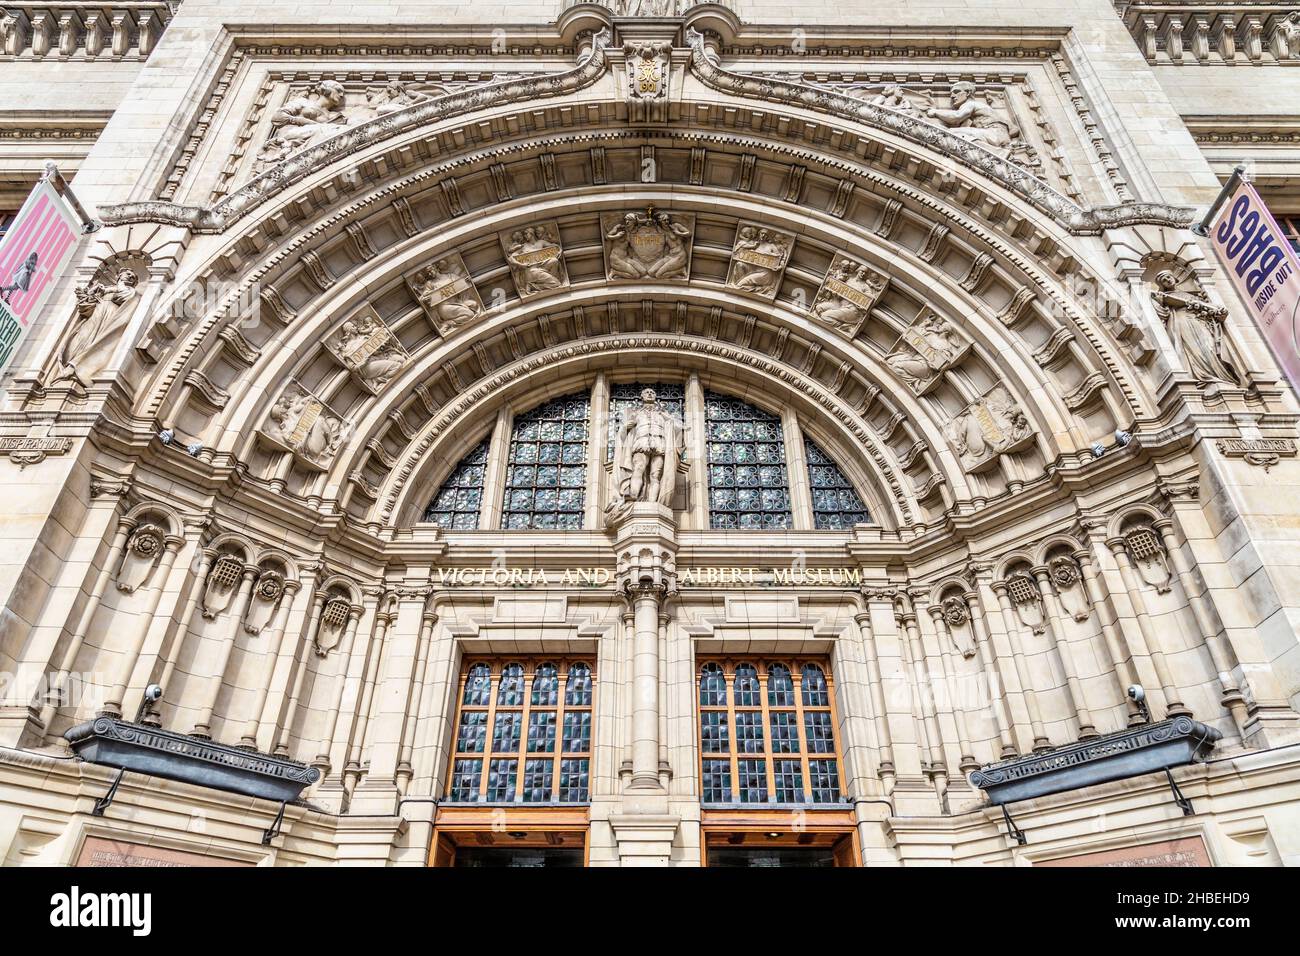 Ornate archivolt arched doorway at the entrance to Victoria and Albert Museum, South Kensington, London, UK Stock Photo